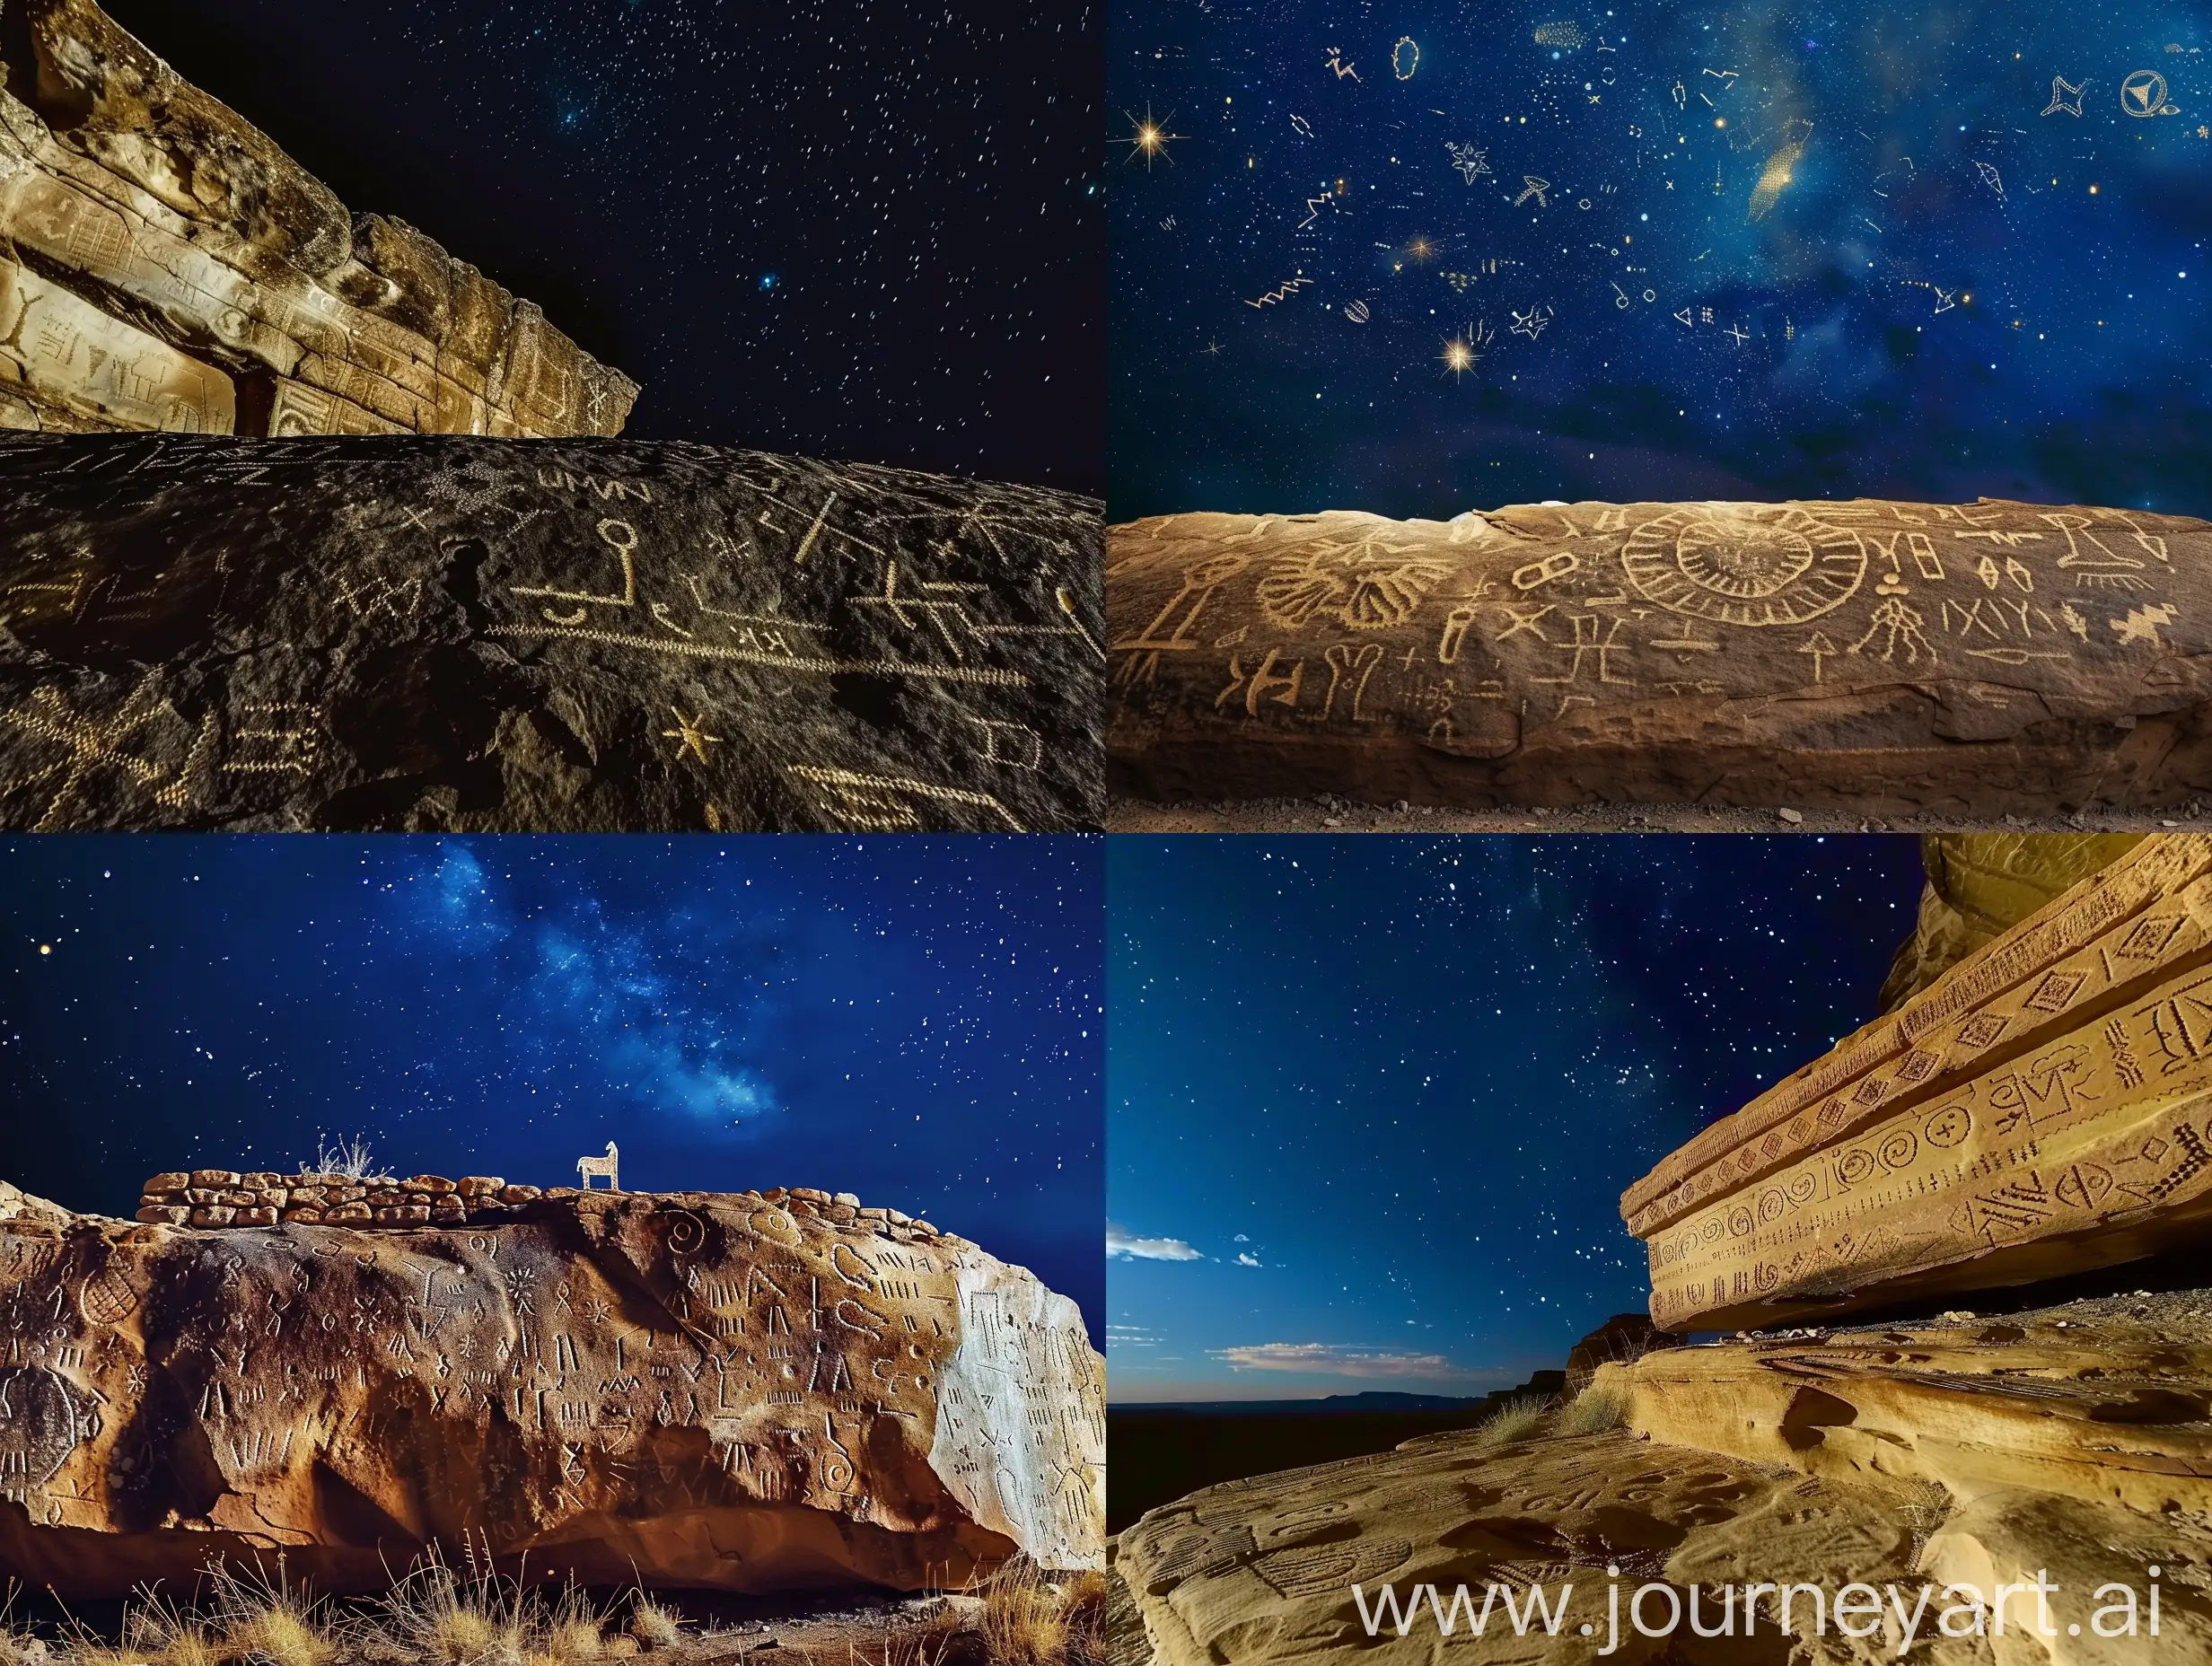 Ancient-Petroglyph-Carvings-Under-a-Starlit-Sky